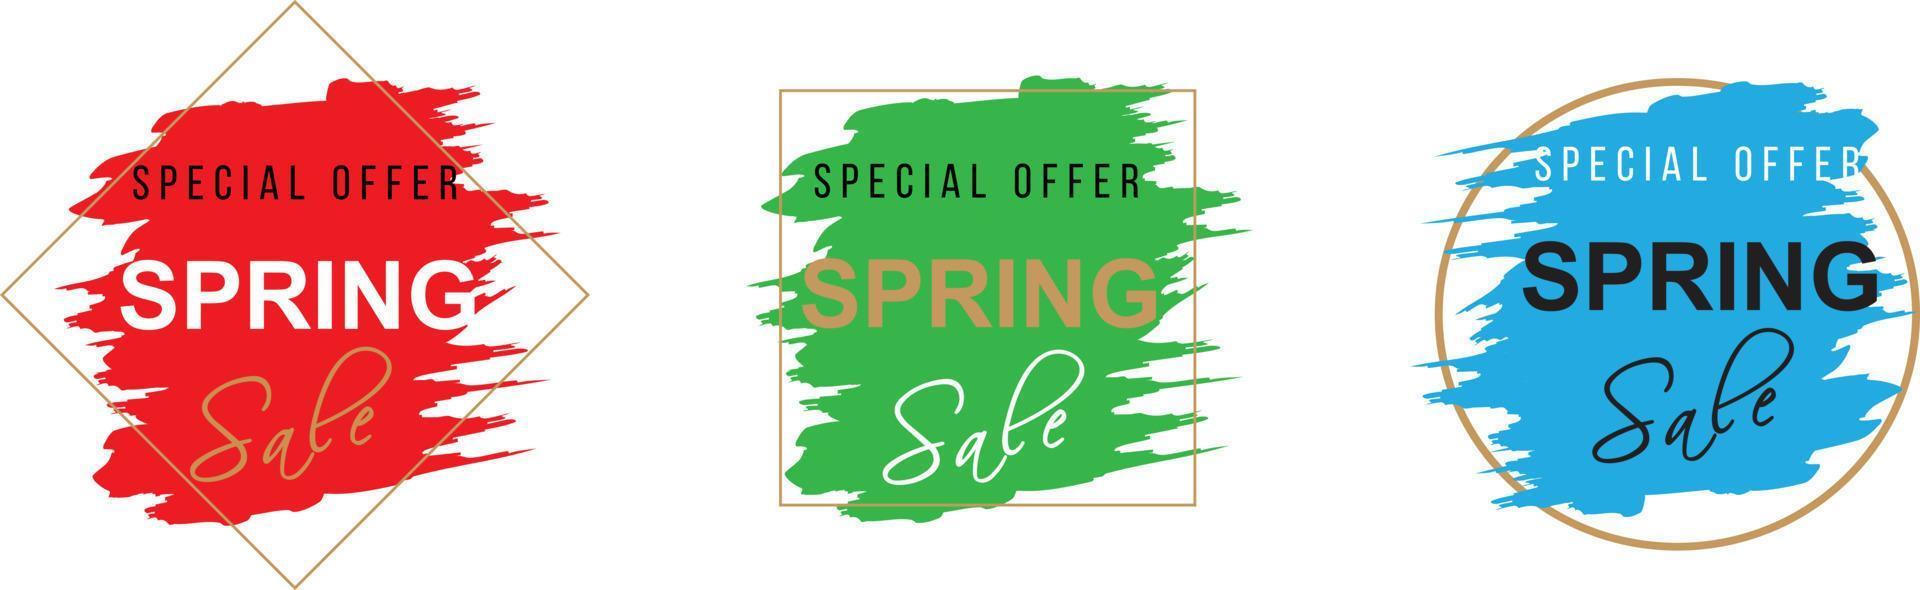 Spring Sale design for advertising, banners, leaflets and flyers. vector